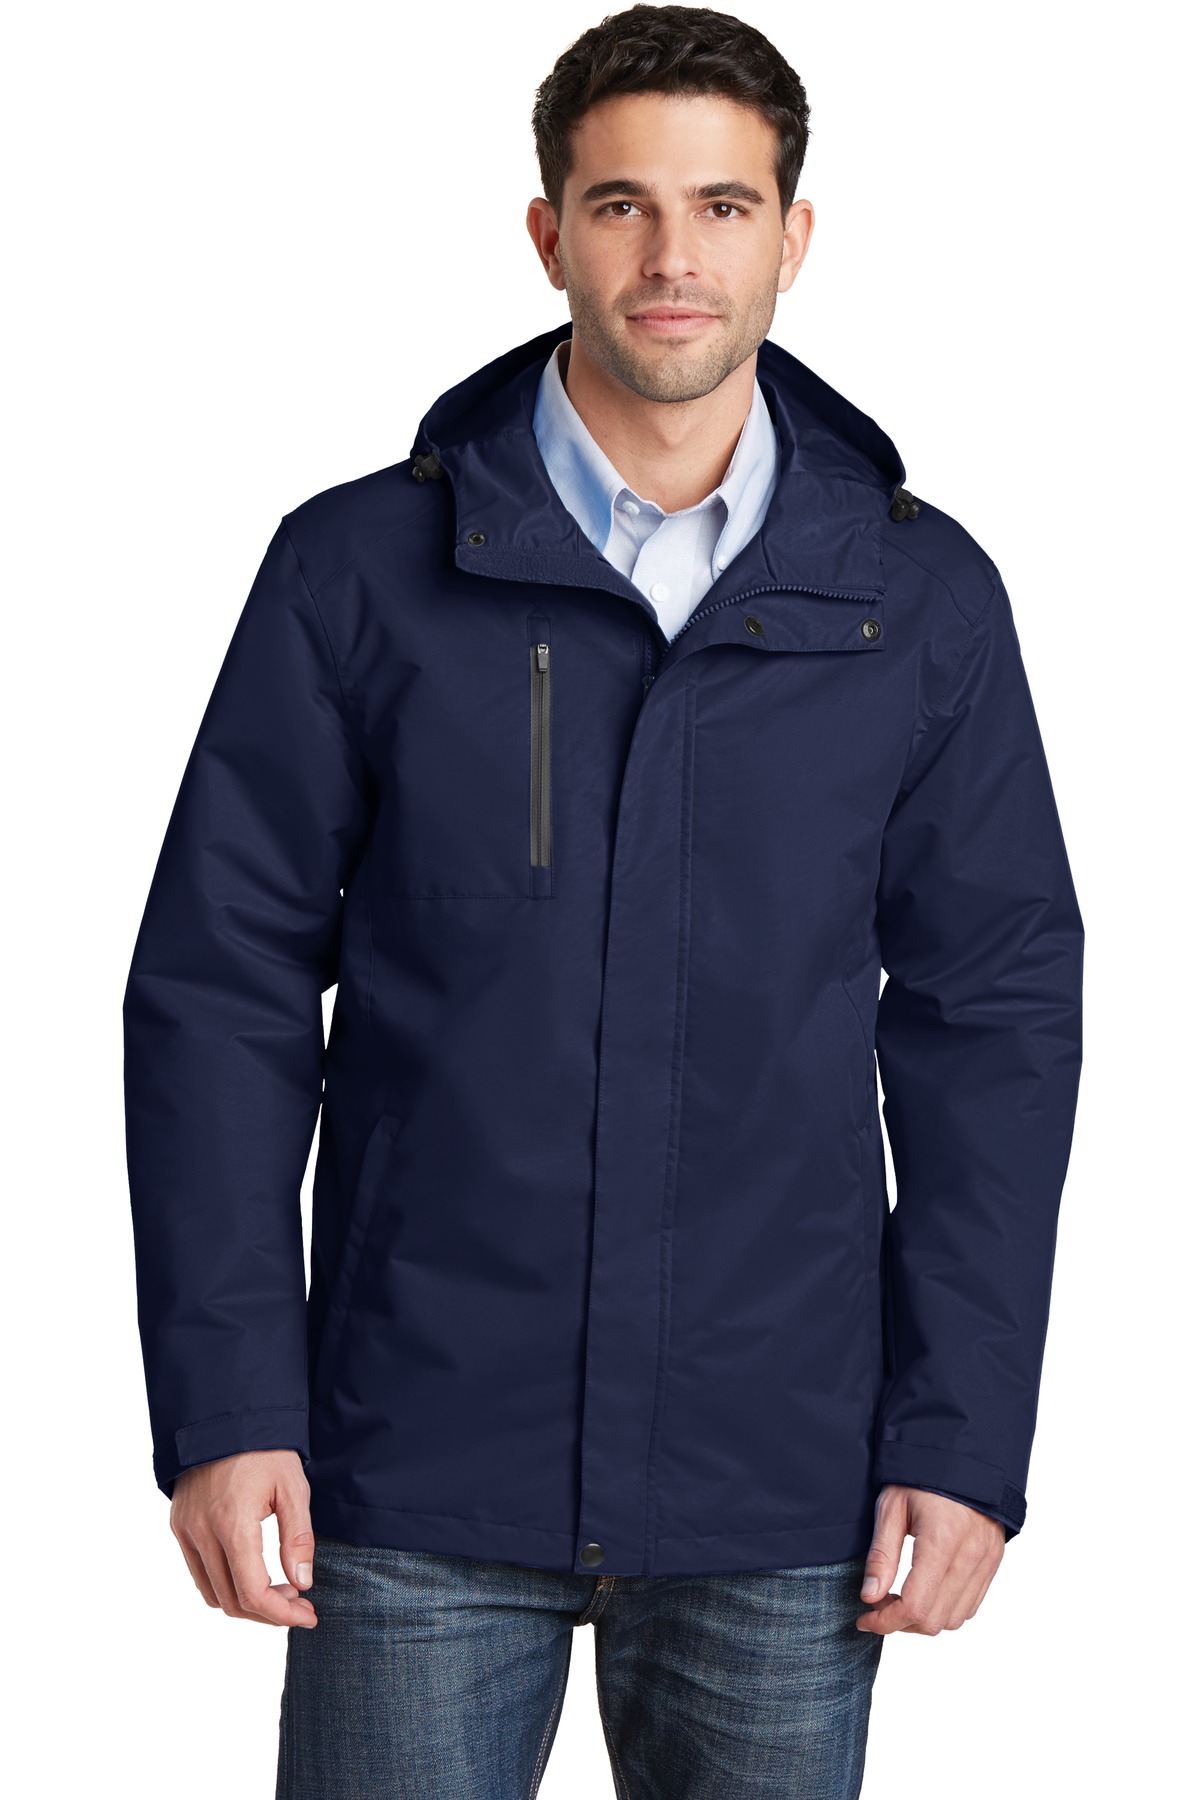 Port Authority All Conditions Jacket-M (True Navy) - image 1 of 6